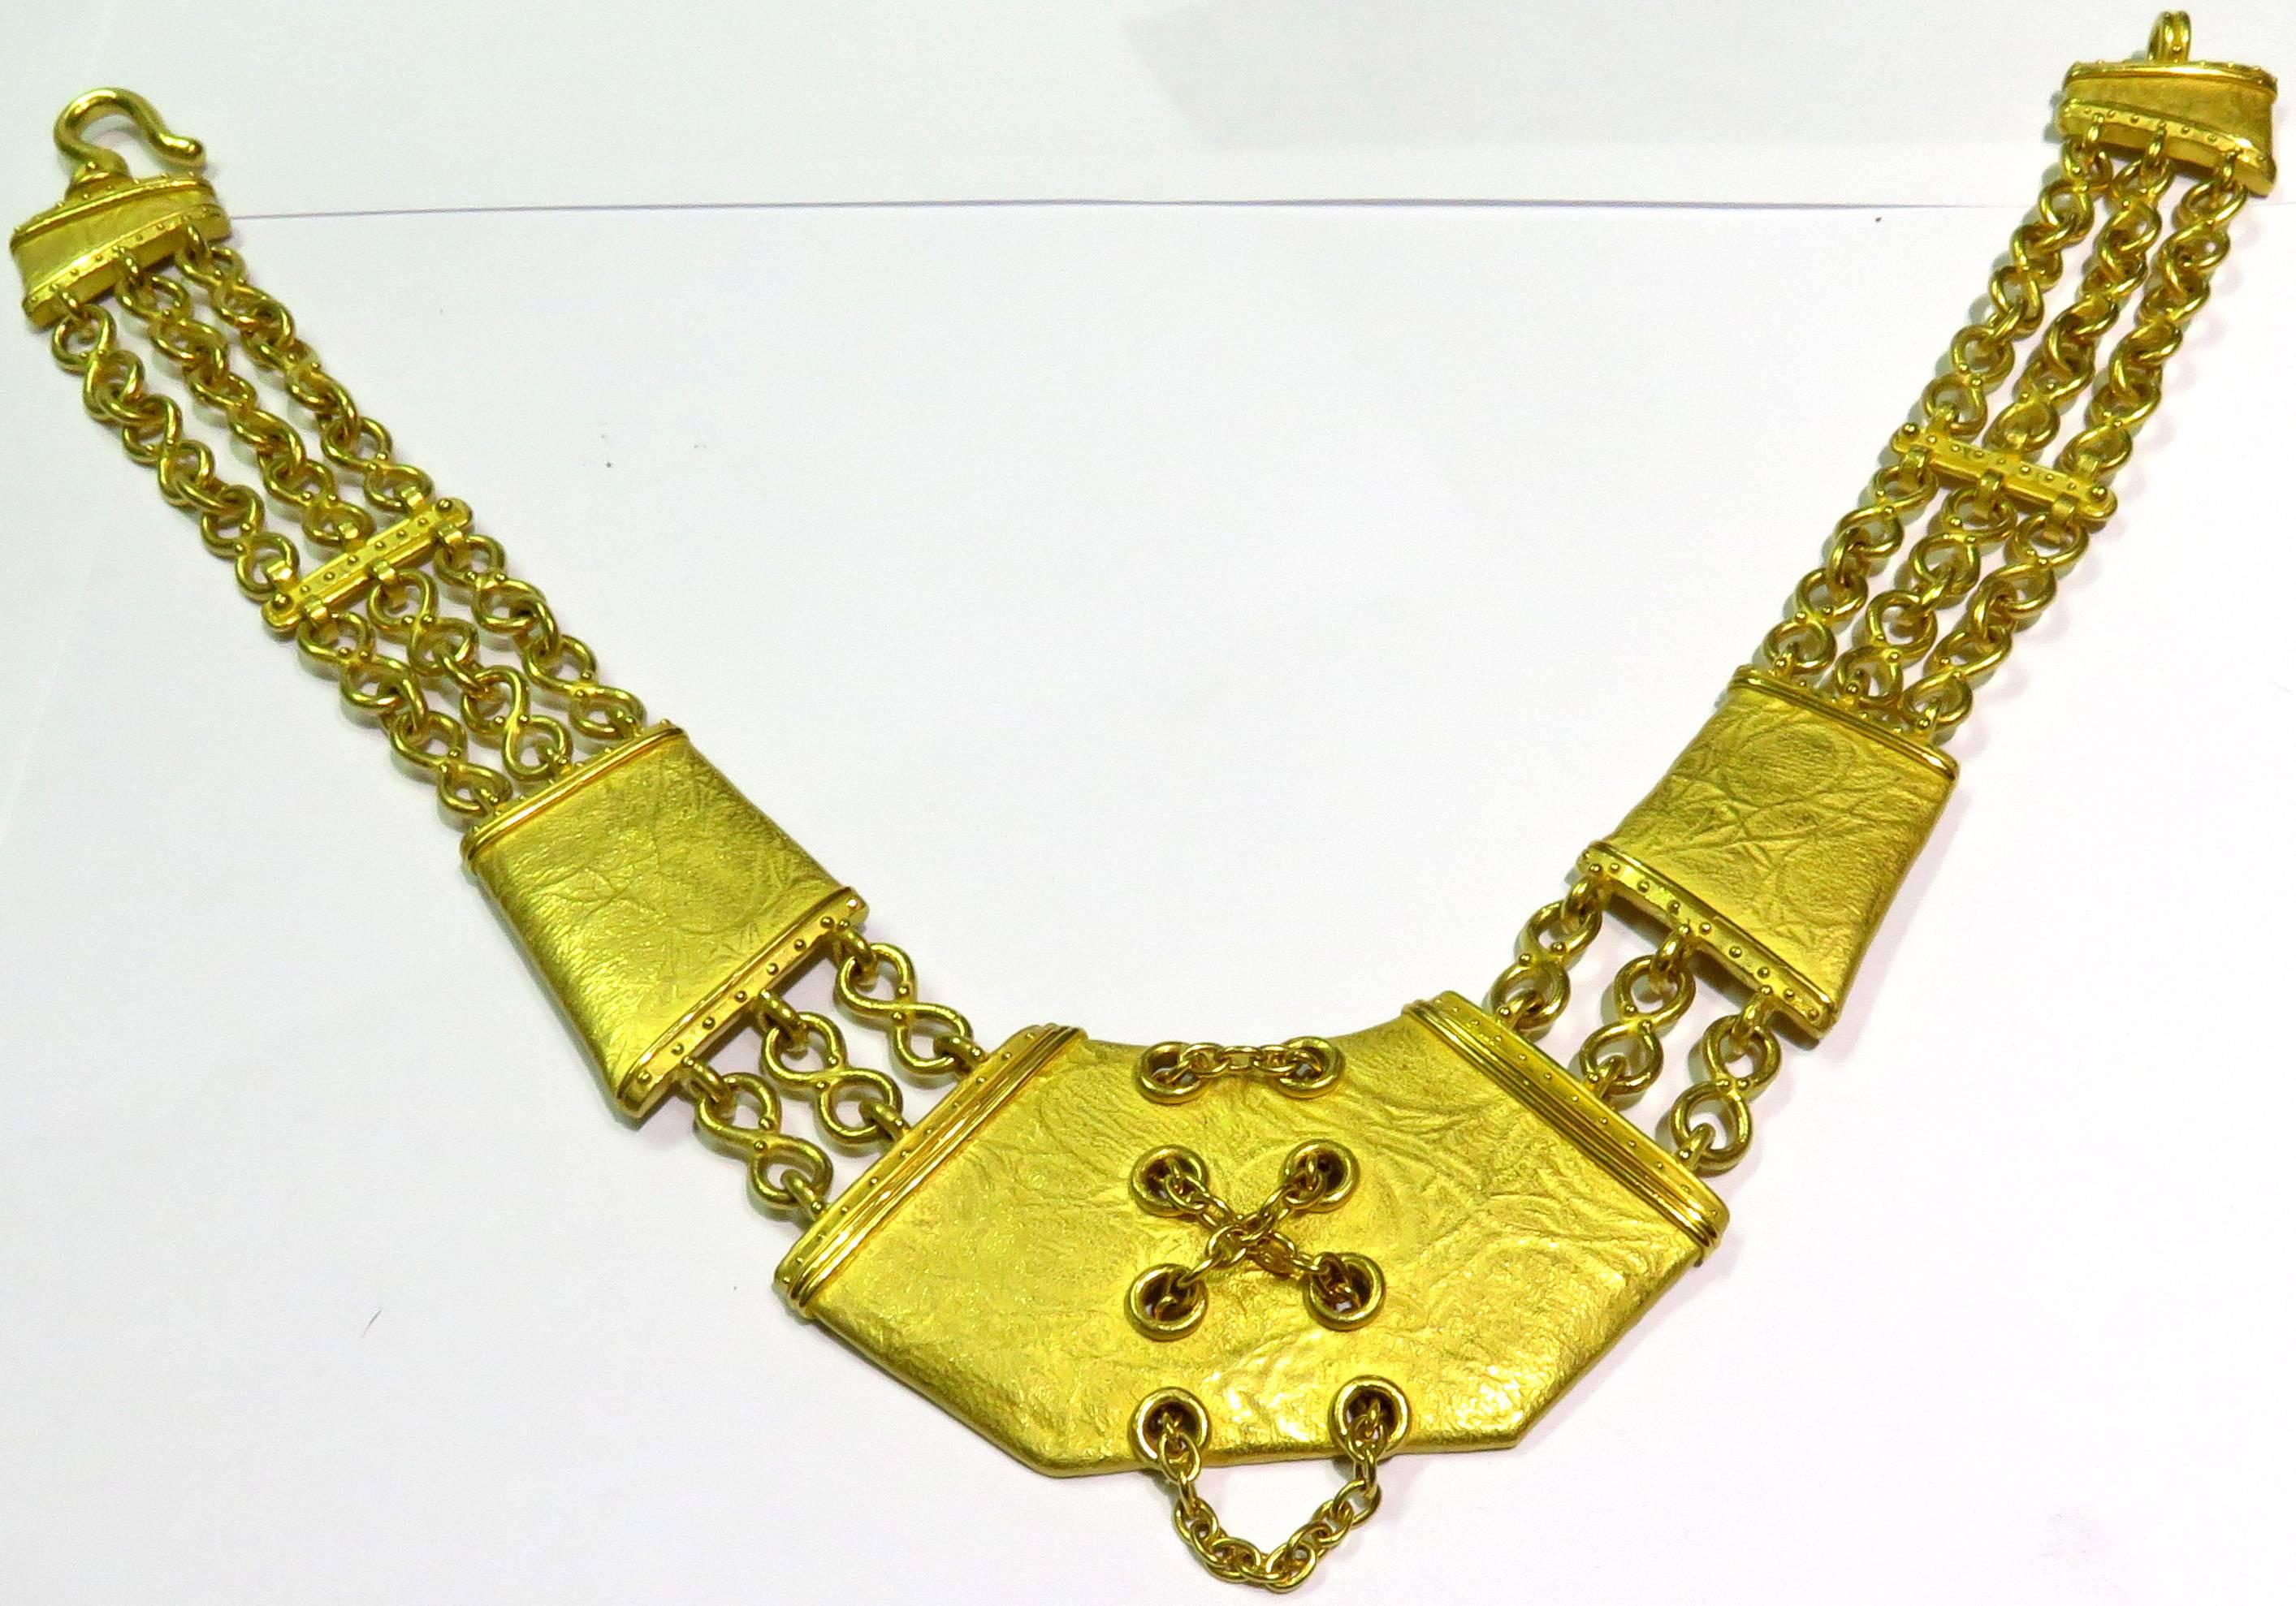 Extraordinary Denise Roberge Edgy Gold Corset Necklace 2